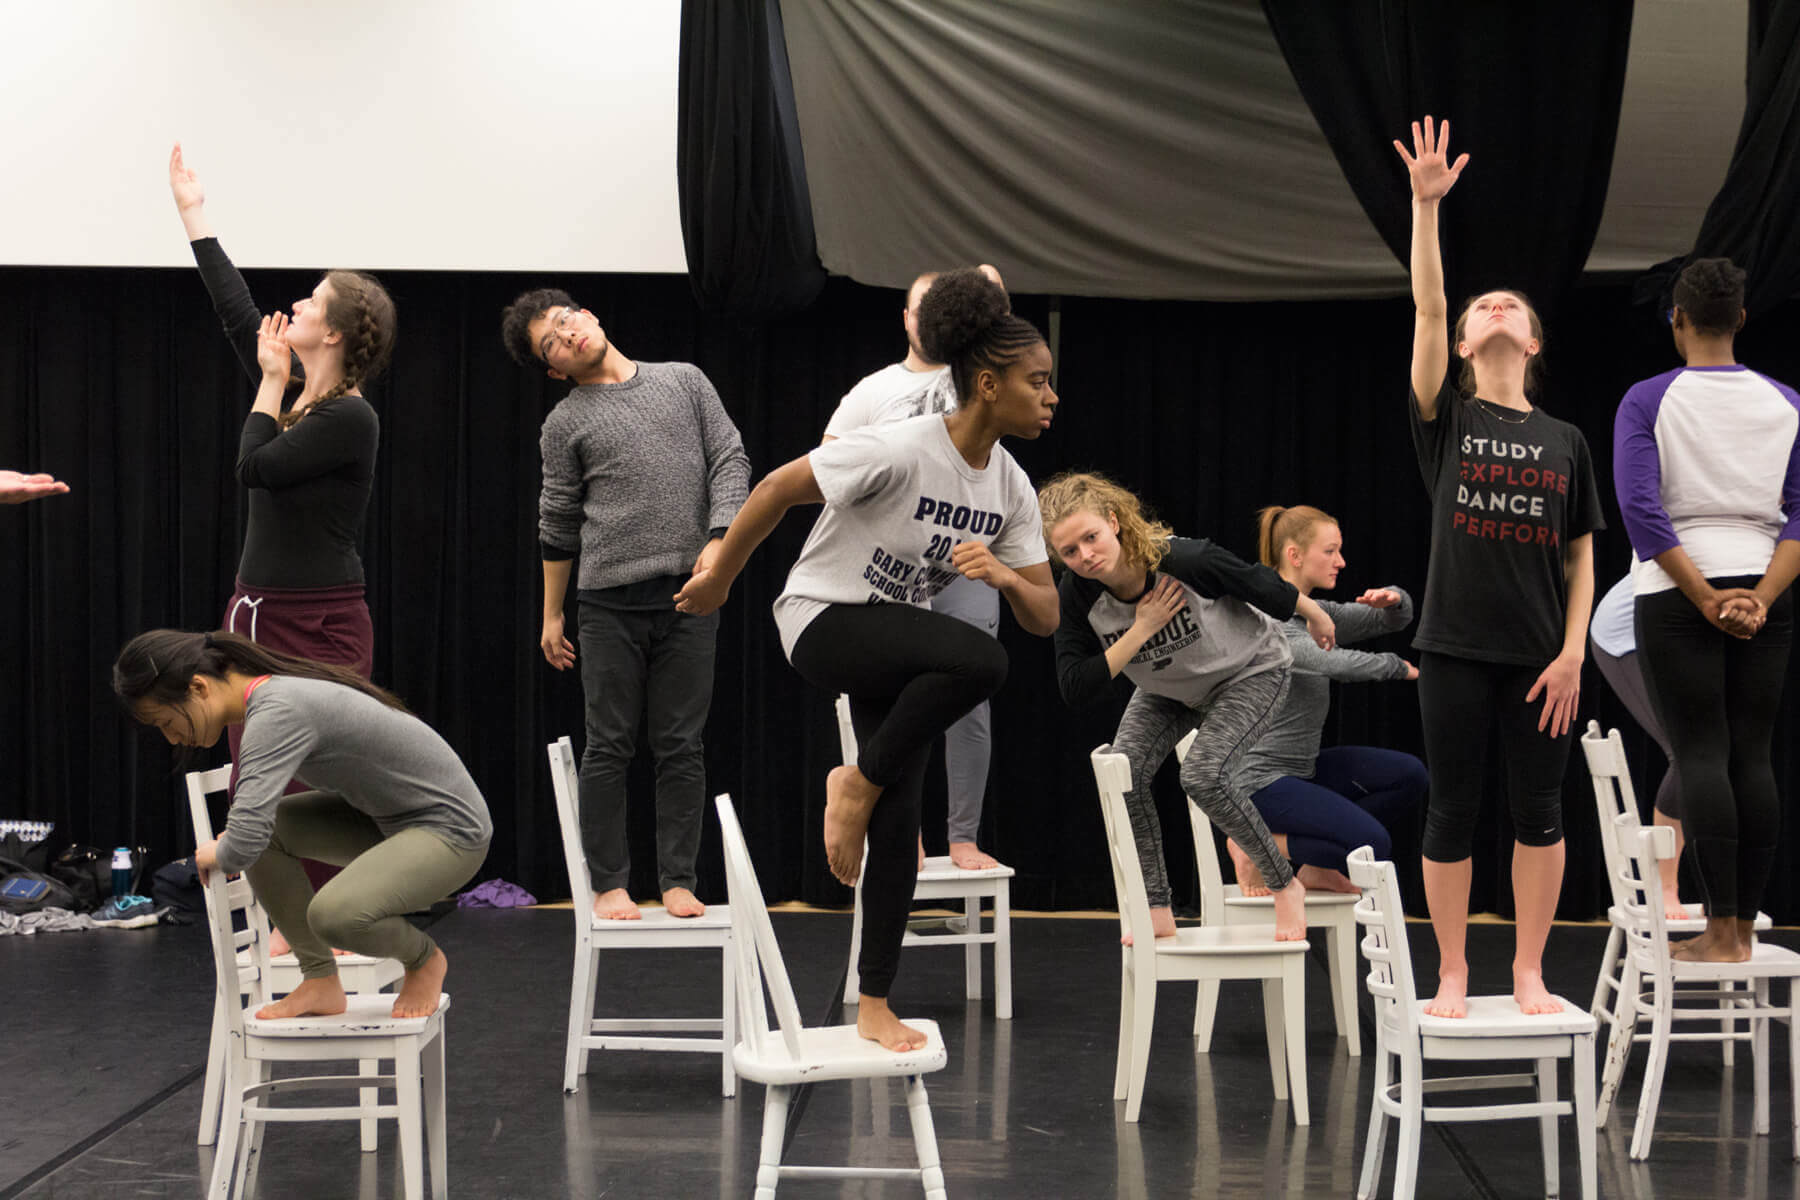 Chicago dance company The Seldoms conducted "Bodies on the Gears" dance workshop for Purdue Dance students